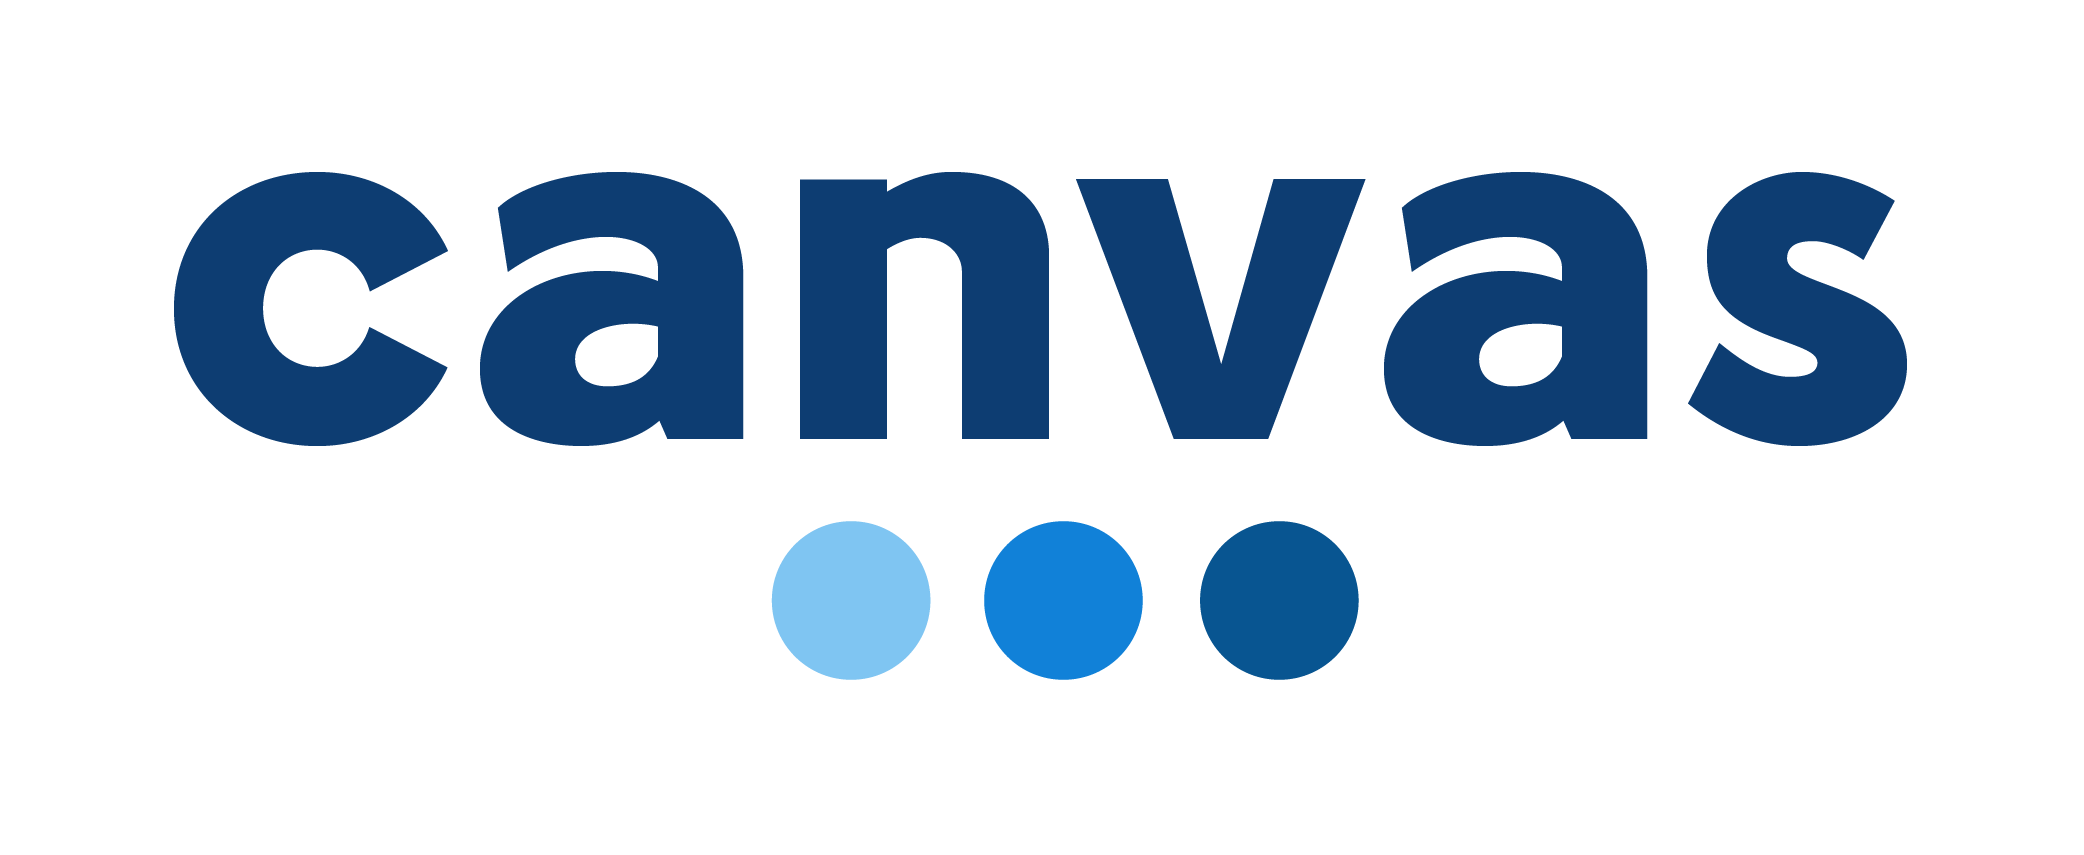 Canvas logo (blue with three dots in different shades of blue below the name)